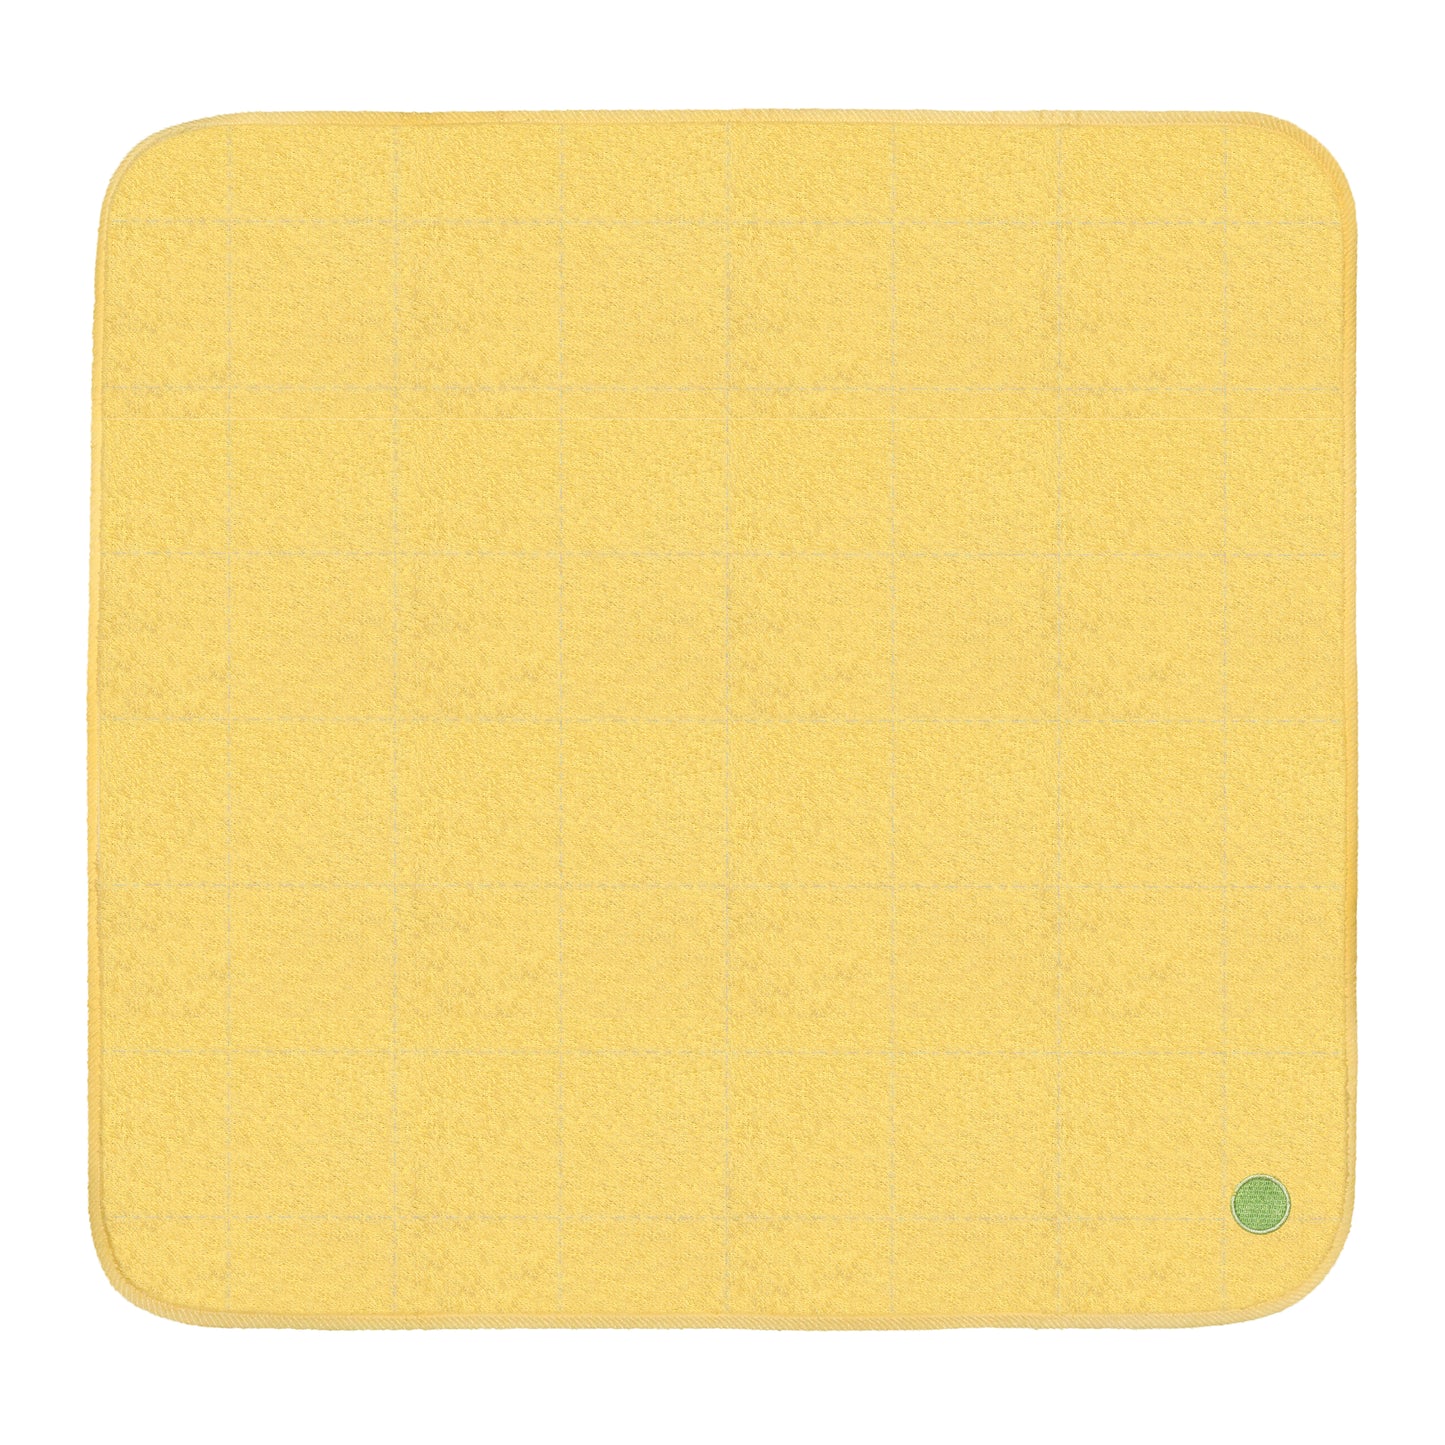 Incontinence Mats - BUTTER ME UP (Yellow) 3 x 3 / 0.91 (1.98 lbs)